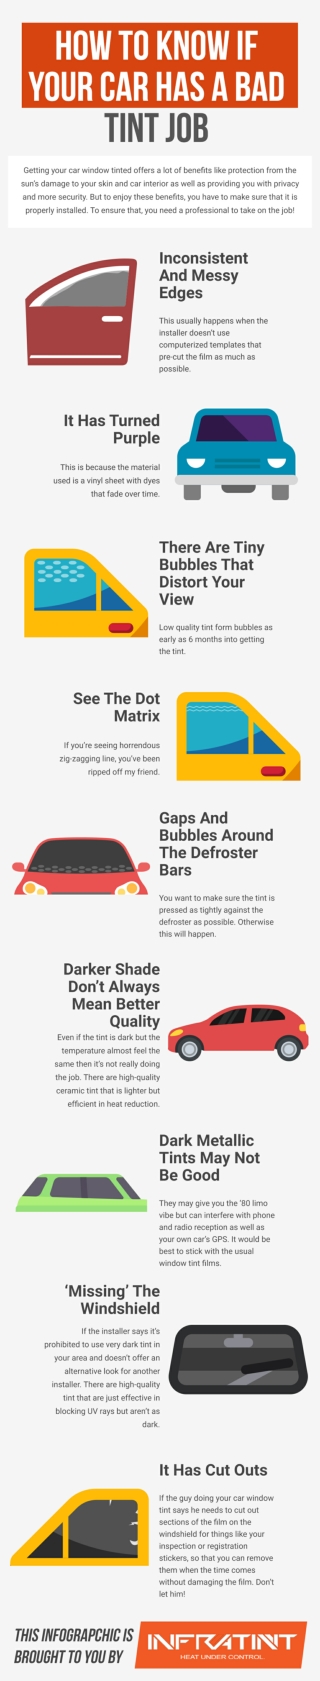 How to know if your car has a bad tint job